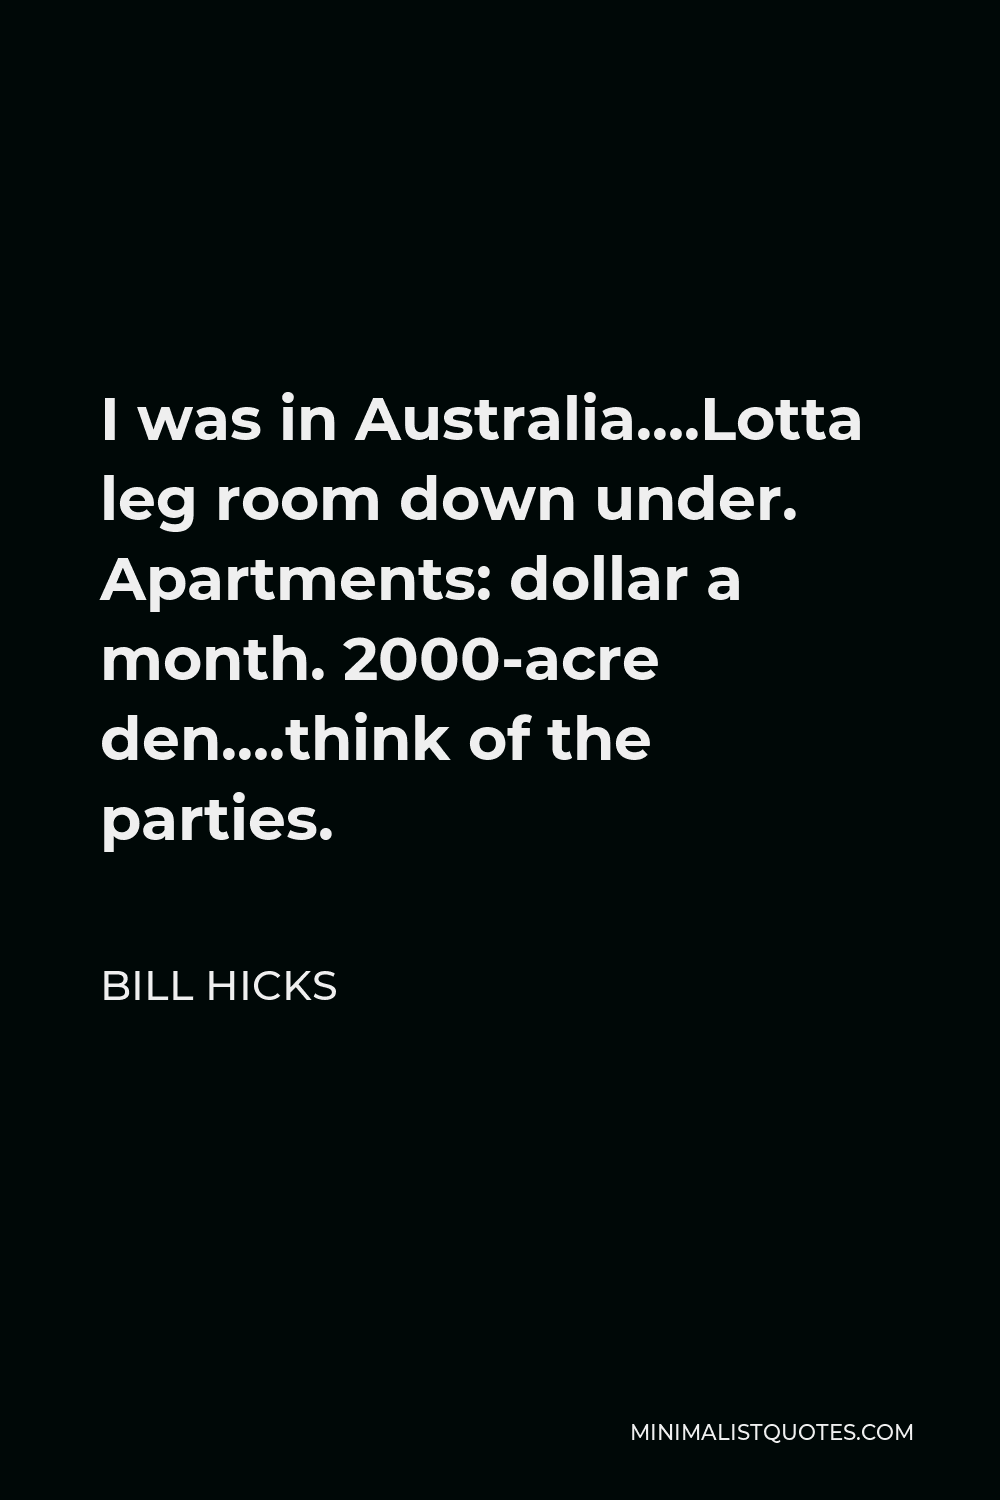 Bill Hicks Quote - I was in Australia….Lotta leg room down under. Apartments: dollar a month. 2000-acre den….think of the parties.